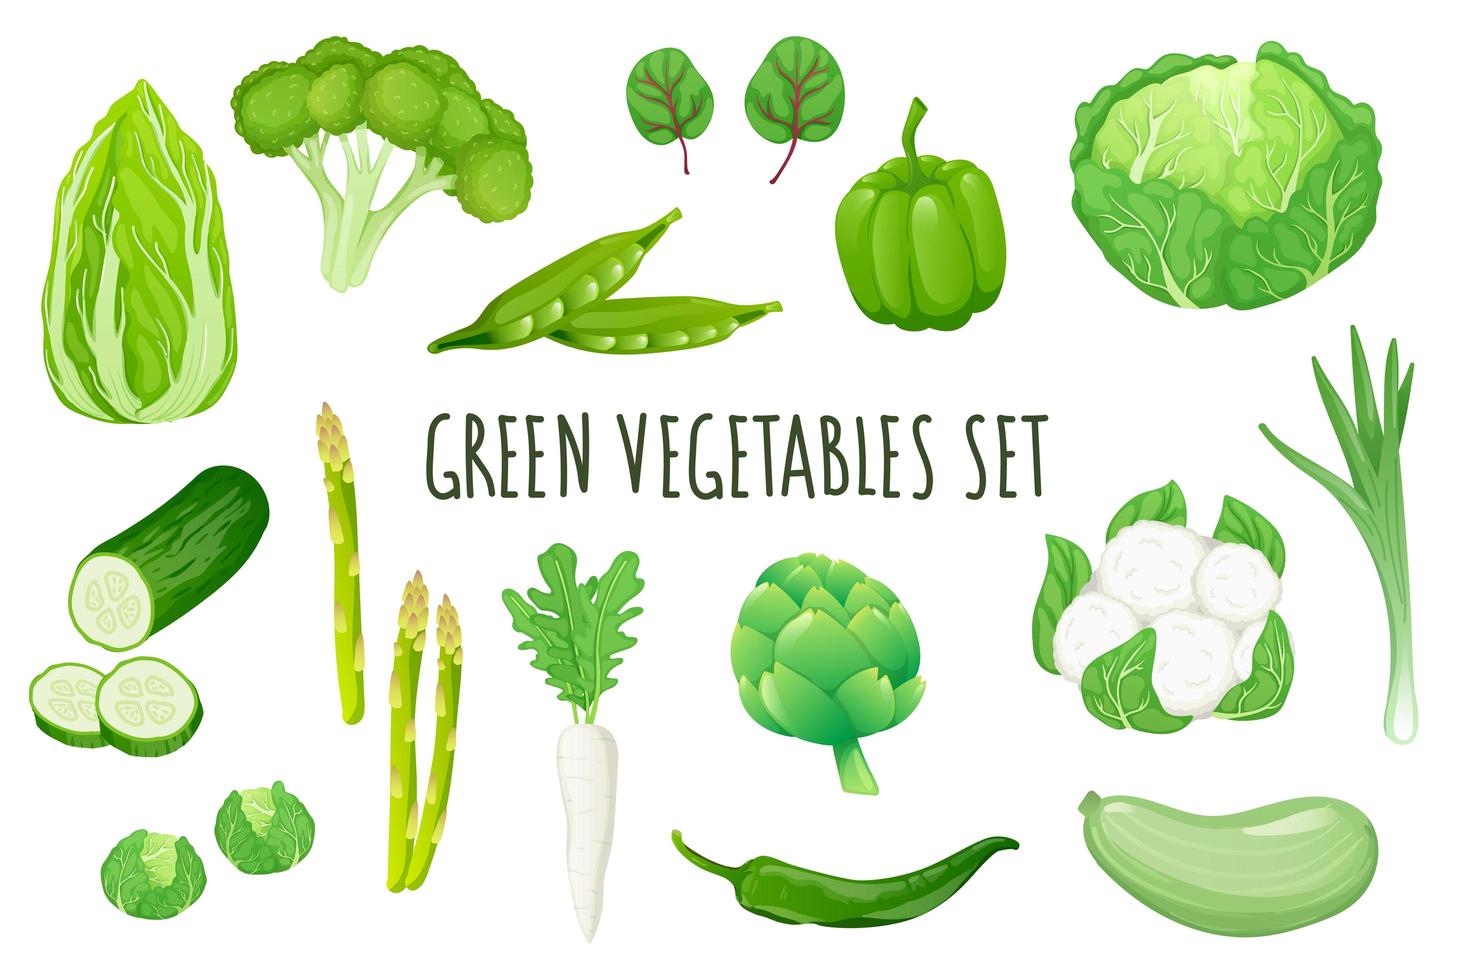 Green vegetables icon set in realistic 3d design. Bundle of cabbage, broccoli, peas, pepper, cucumber, zucchini and other. Vegetarian menu collection. Vector illustration isolated on white background